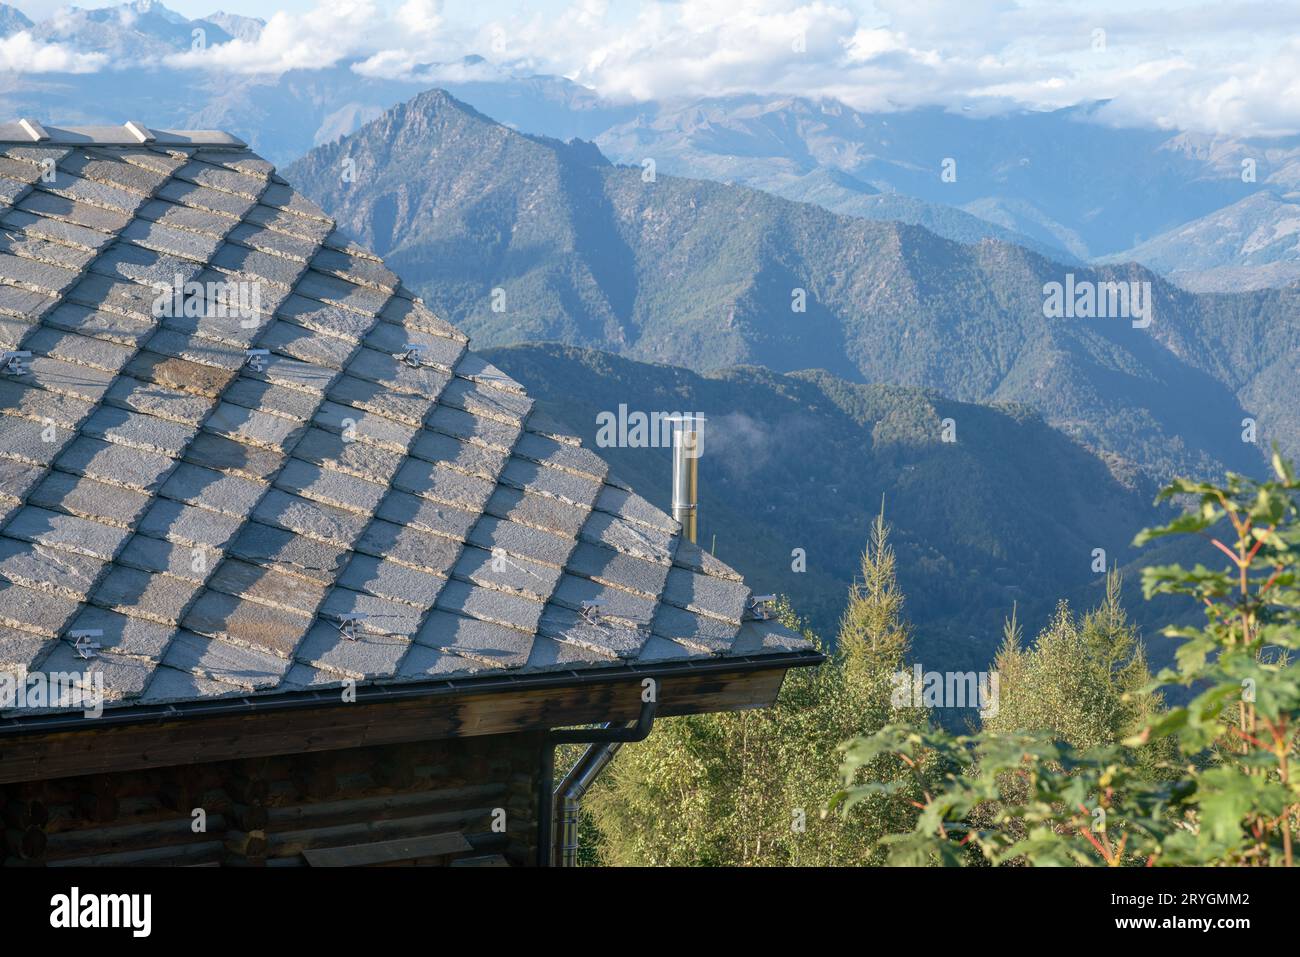 roof with stone tiles, typical of mountain house houses, blue gray granite stones, mountains in background. thermal insulation, energy class. Stock Photo